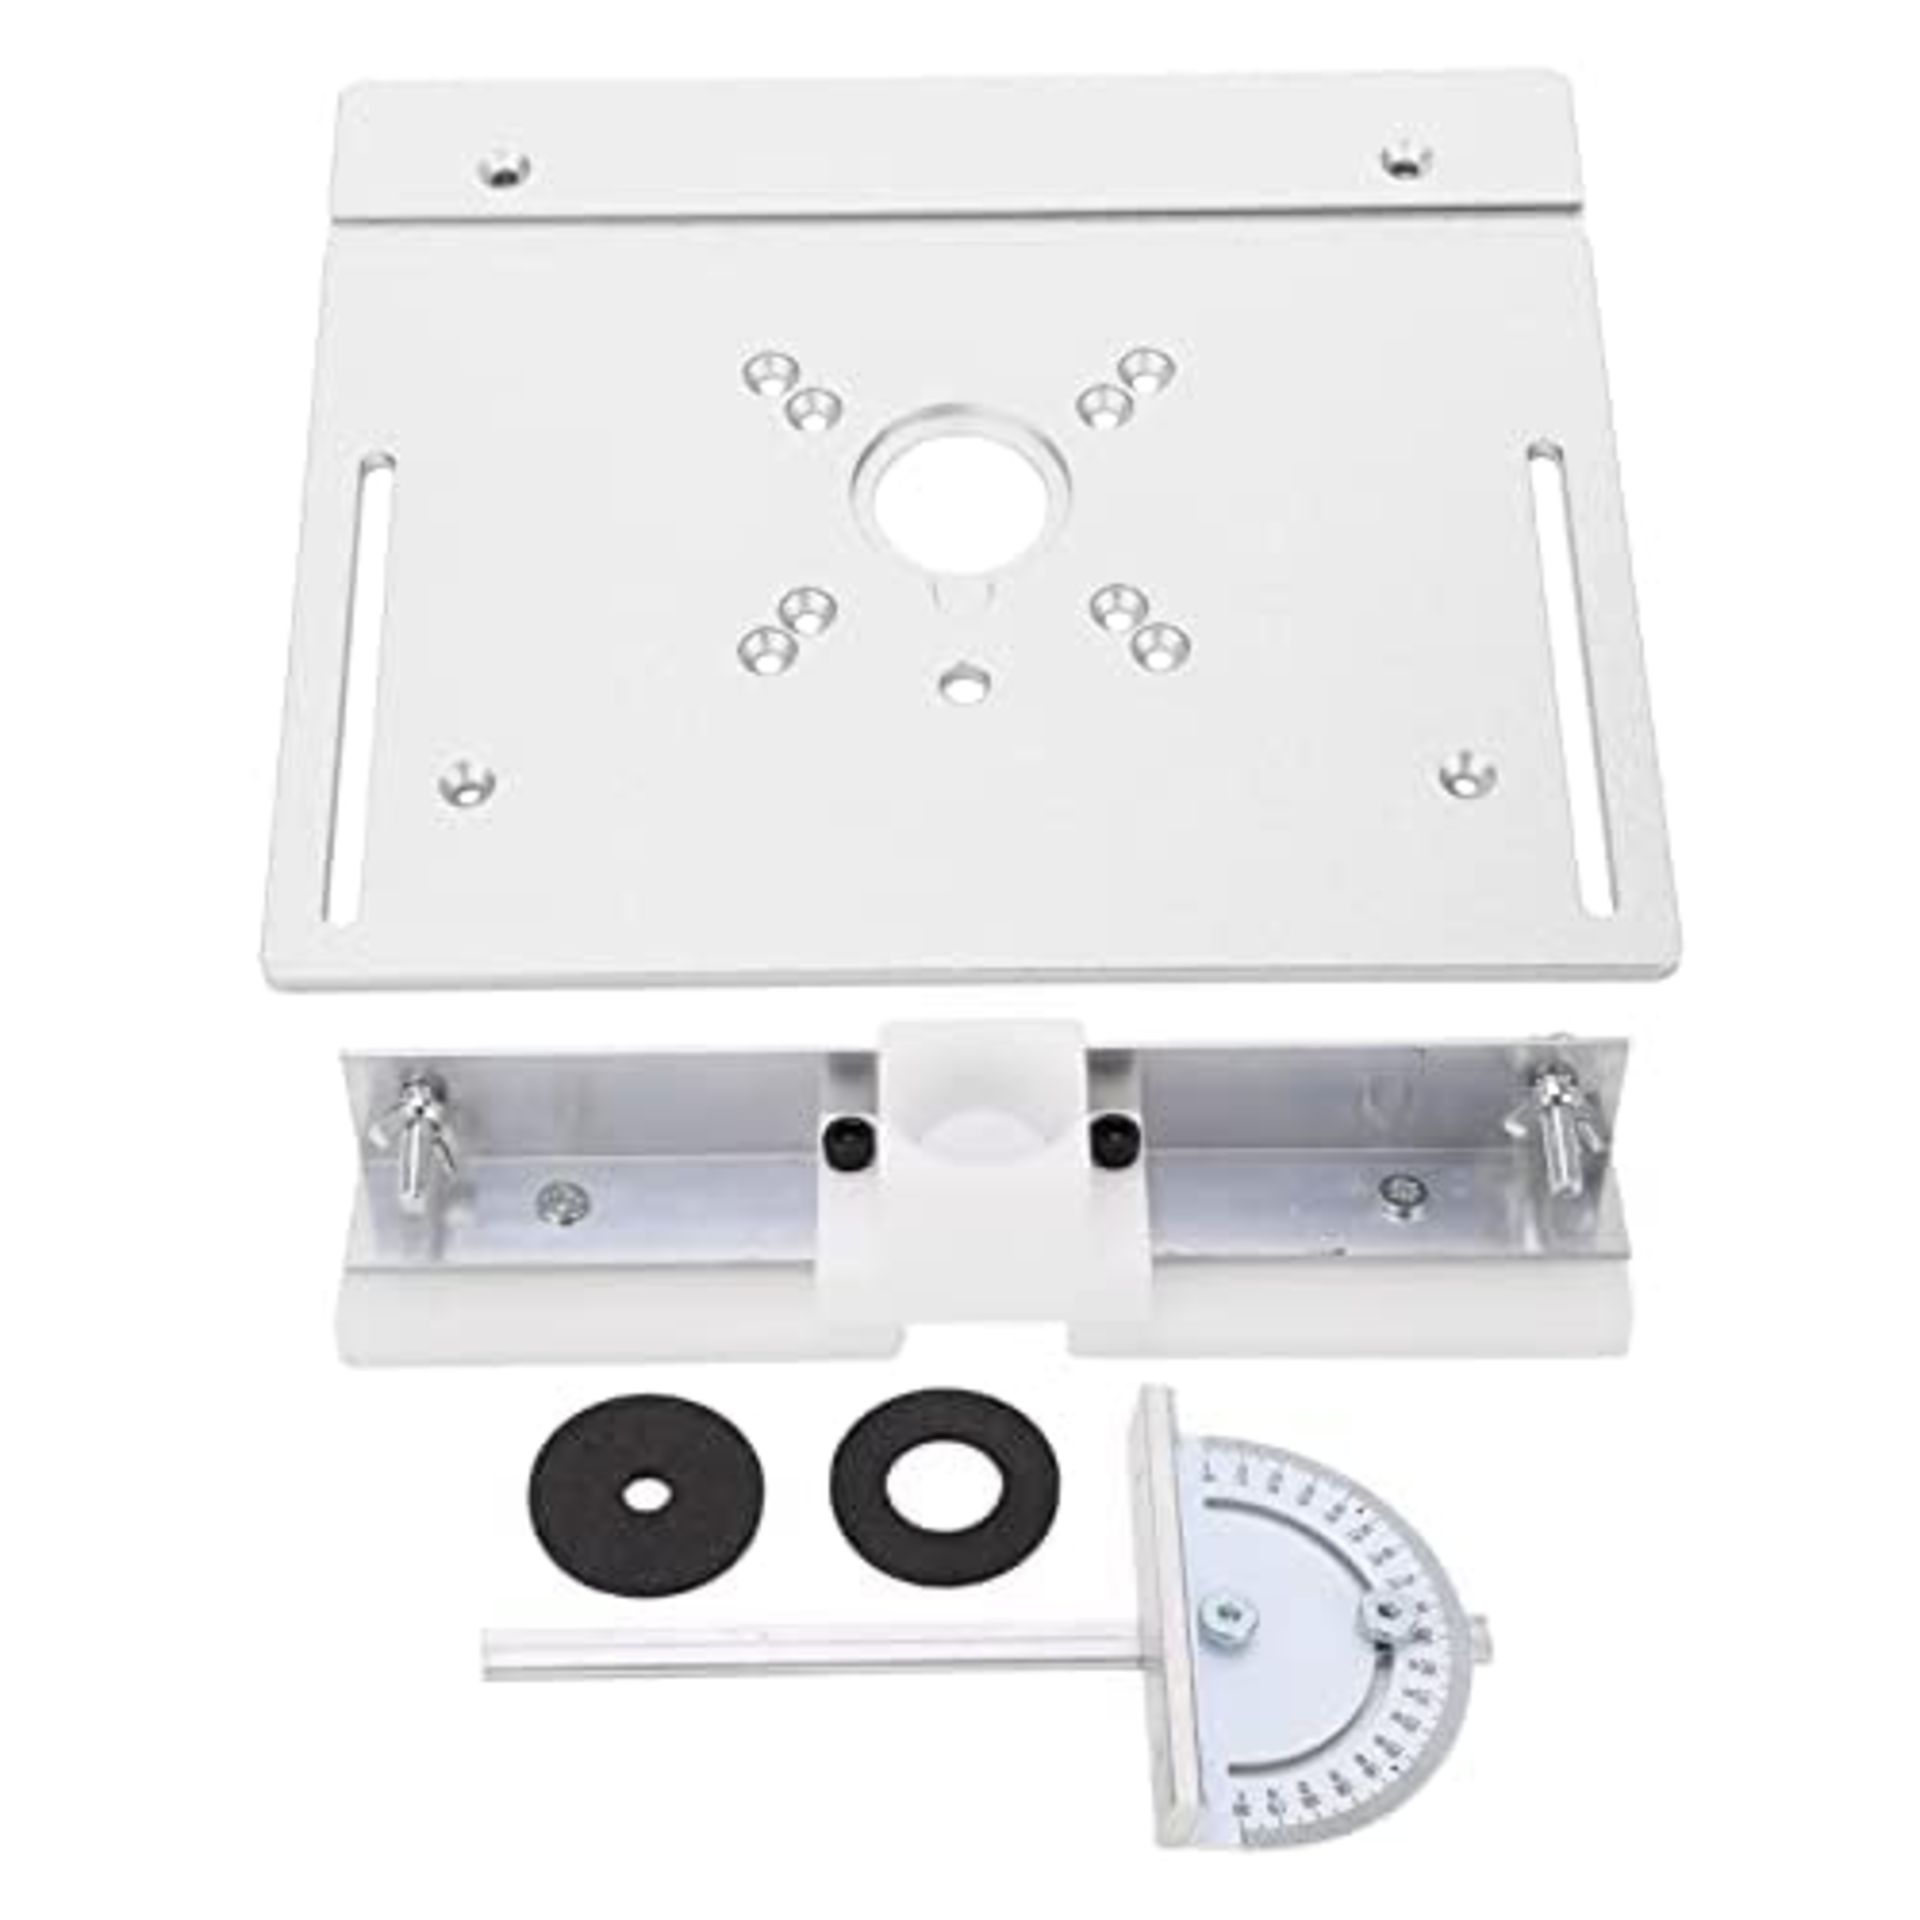 RRP £51.99 Metal Router Lift System Kit Aluminum Woodworking Insert Base Plate Inverter Board Repair - Image 2 of 3